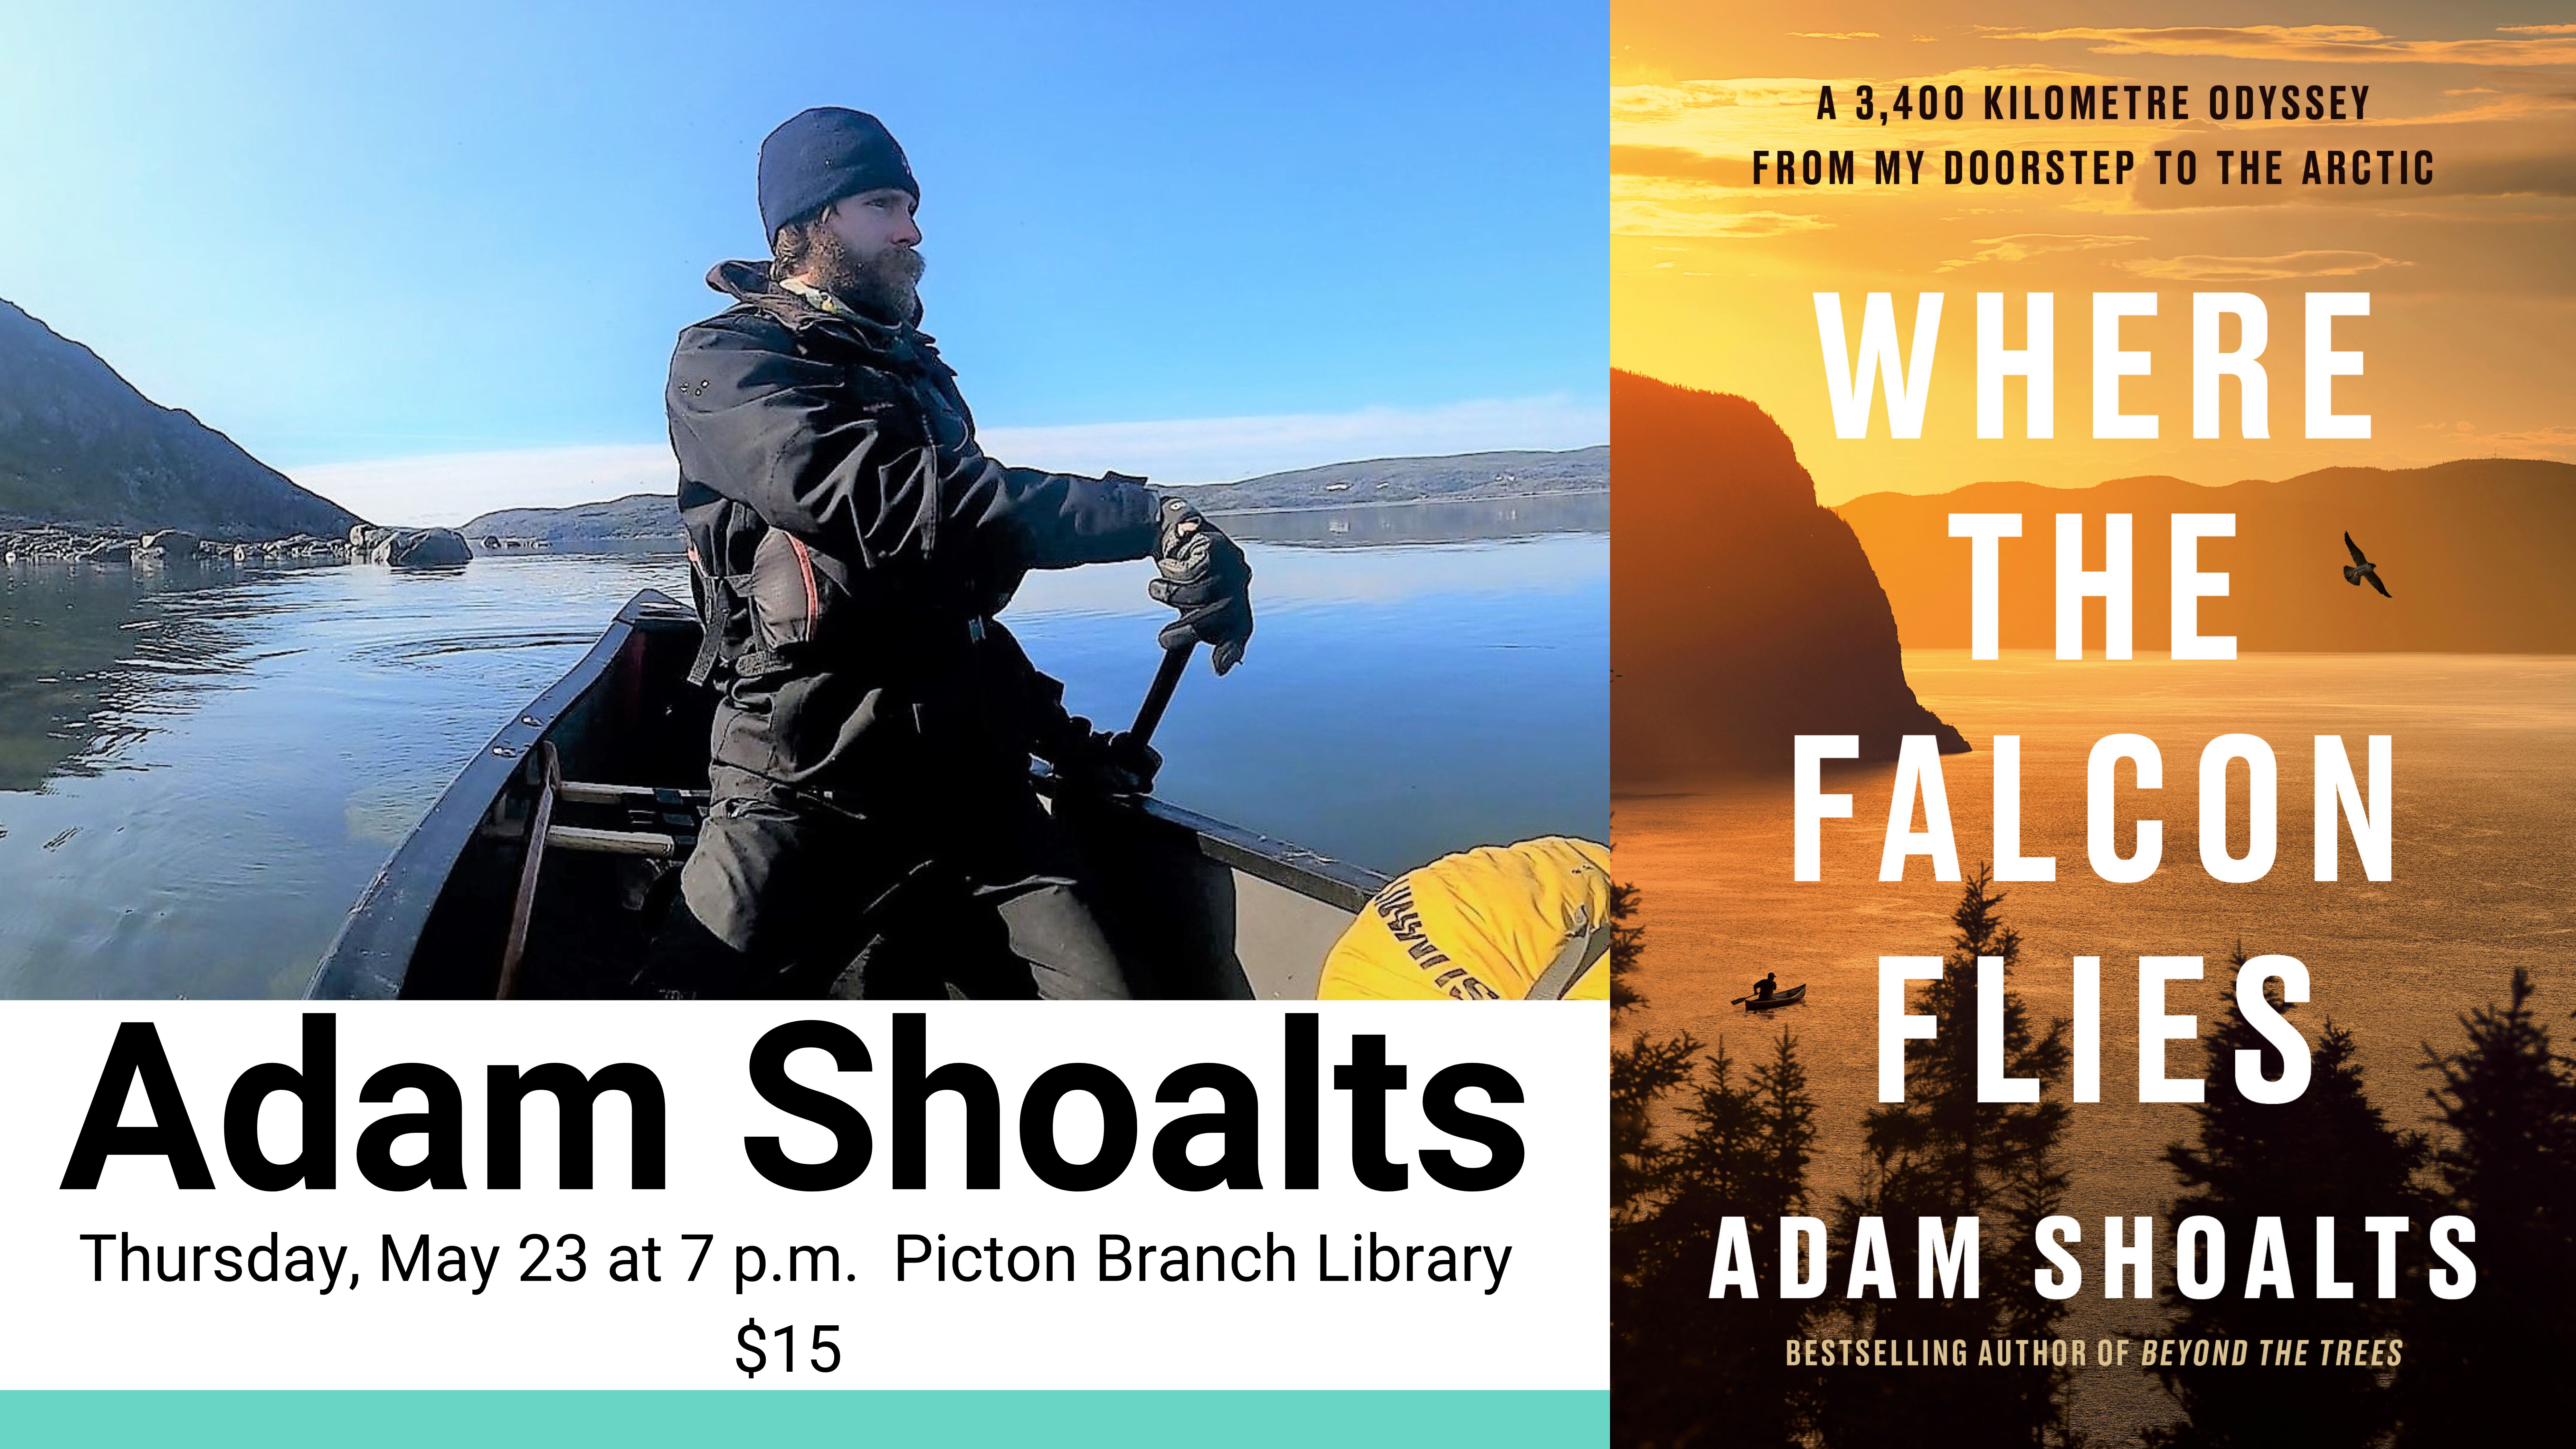 Poster for Adam Shoalts event featuring book cover